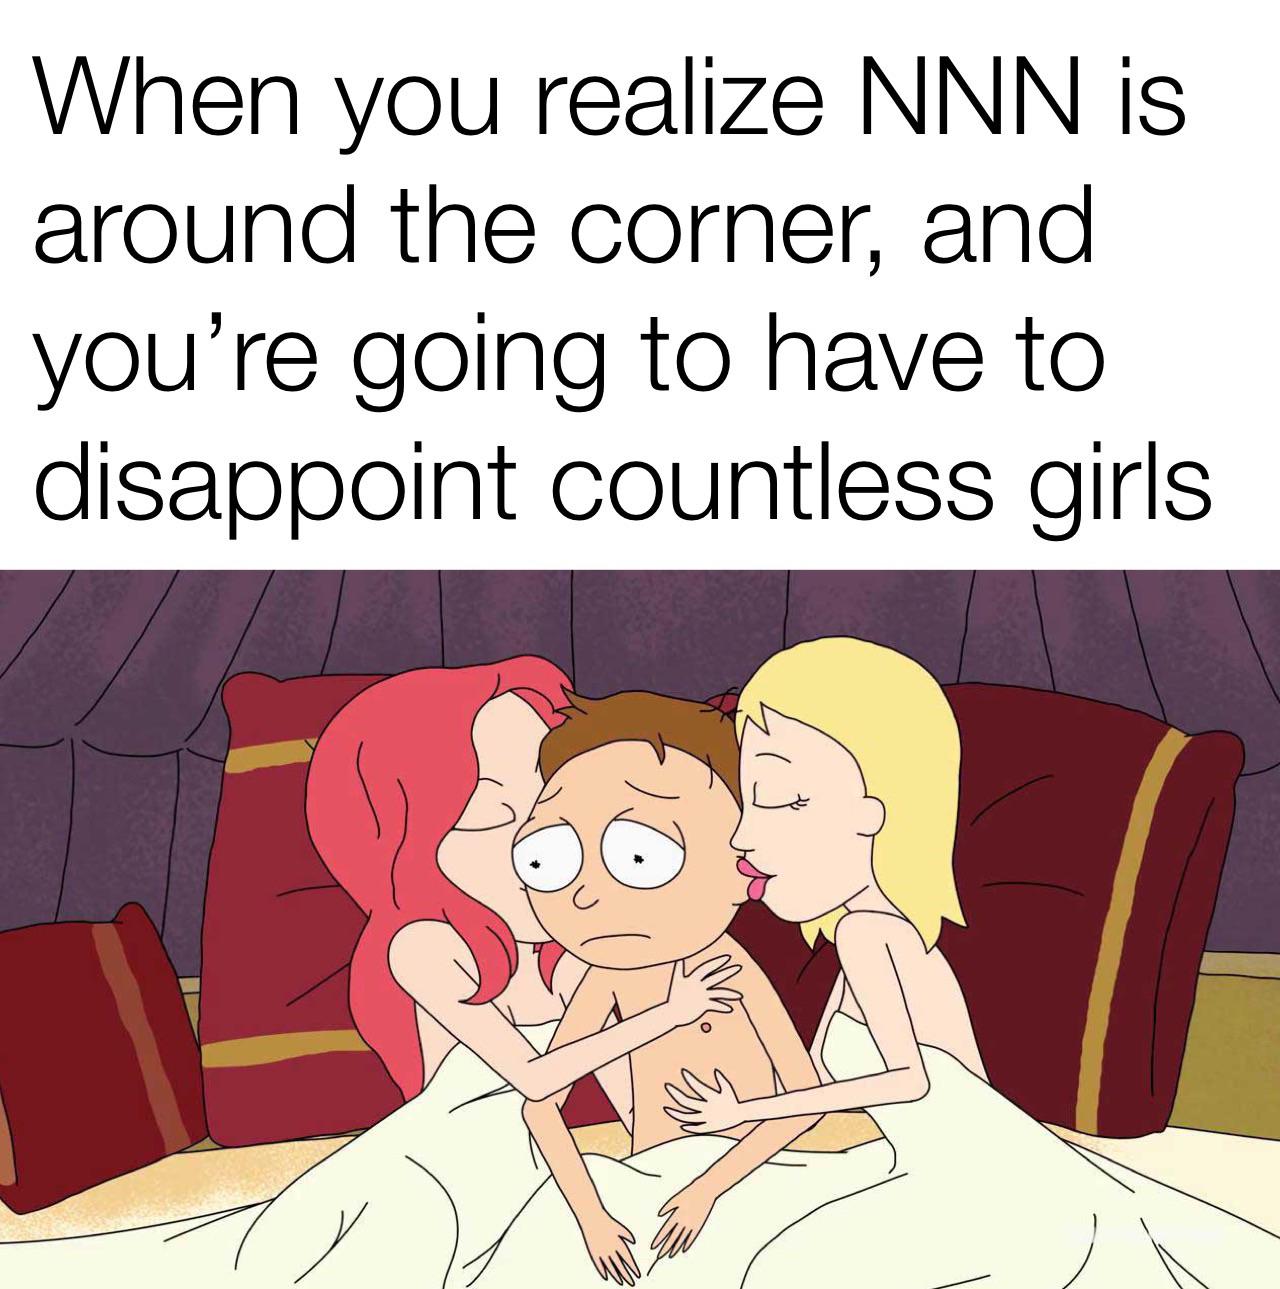 monday morning randomness - cartoon - When you realize Nnn is around the corner, and you're going to have to disappoint countless girls